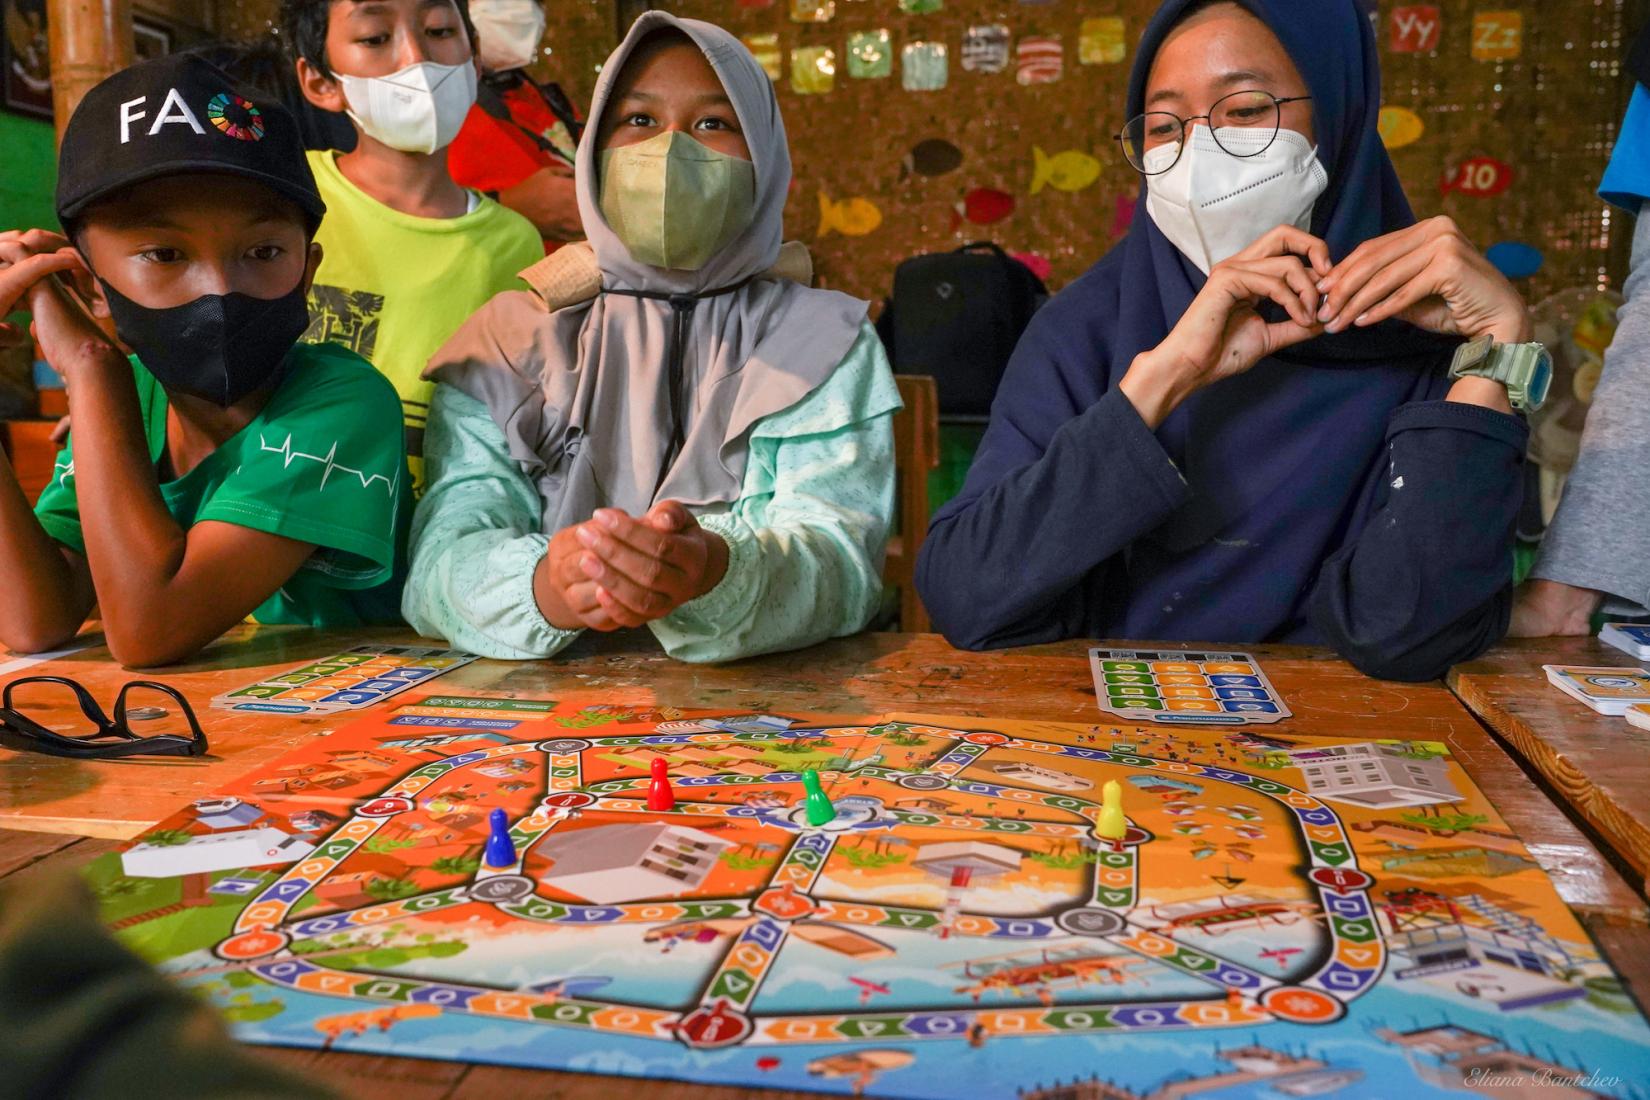 Students play a UNESCO board game designed to promote tsunami readiness and disaster resilience at Sekolah Alam Matoa in West Java, Indonesia, on June 16, 2022